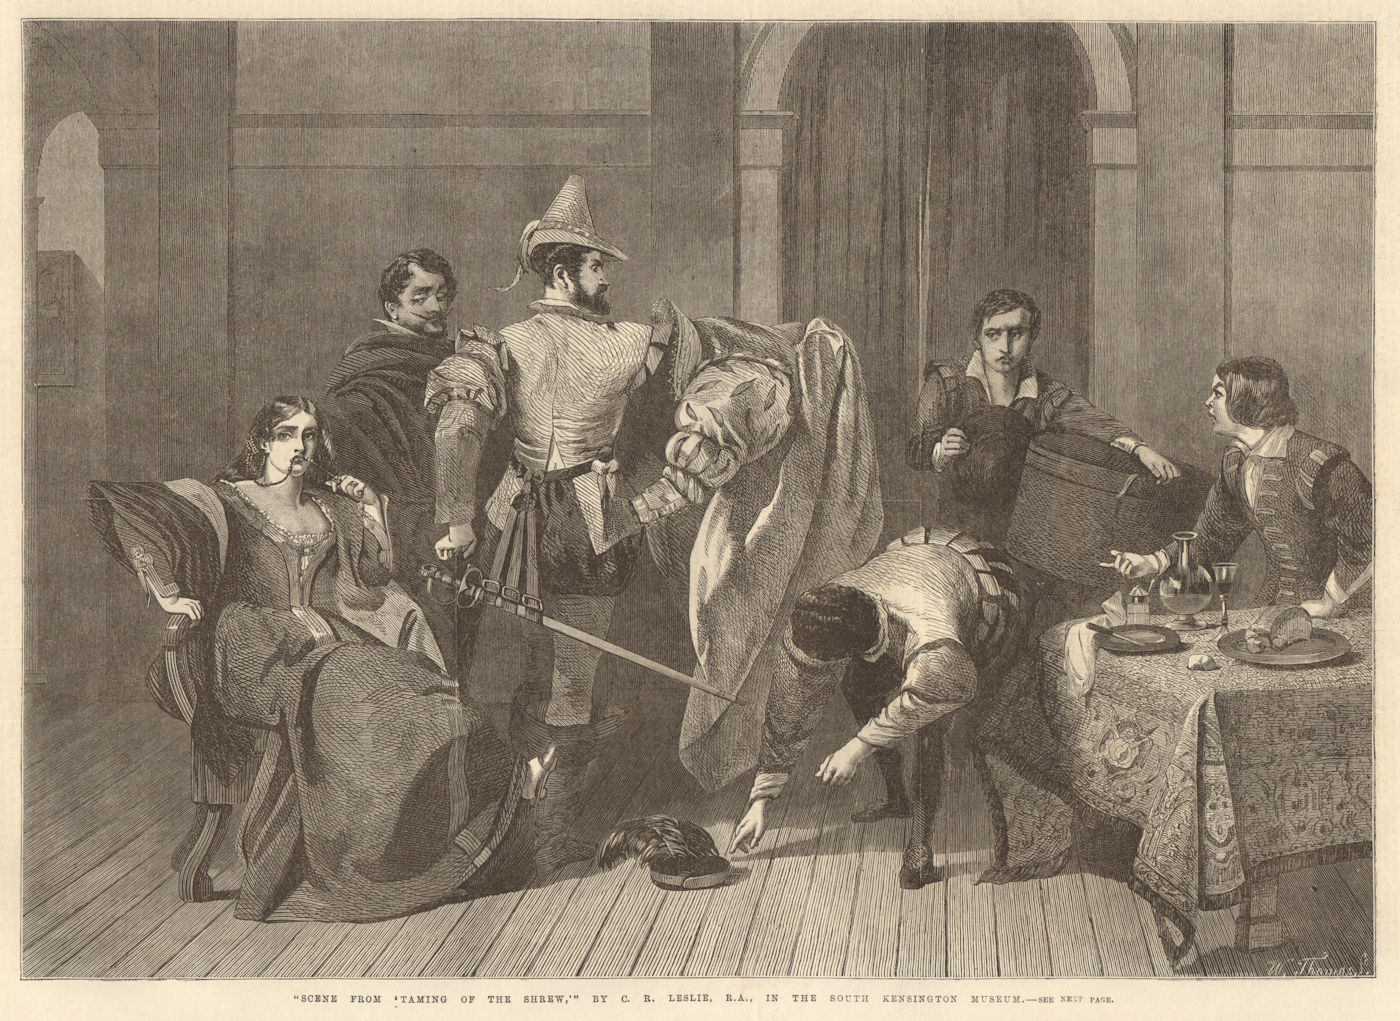 Associate Product "Scene from 'Taming of the shrew' "by C. R. Leslie, R. A. Shakespeare 1866